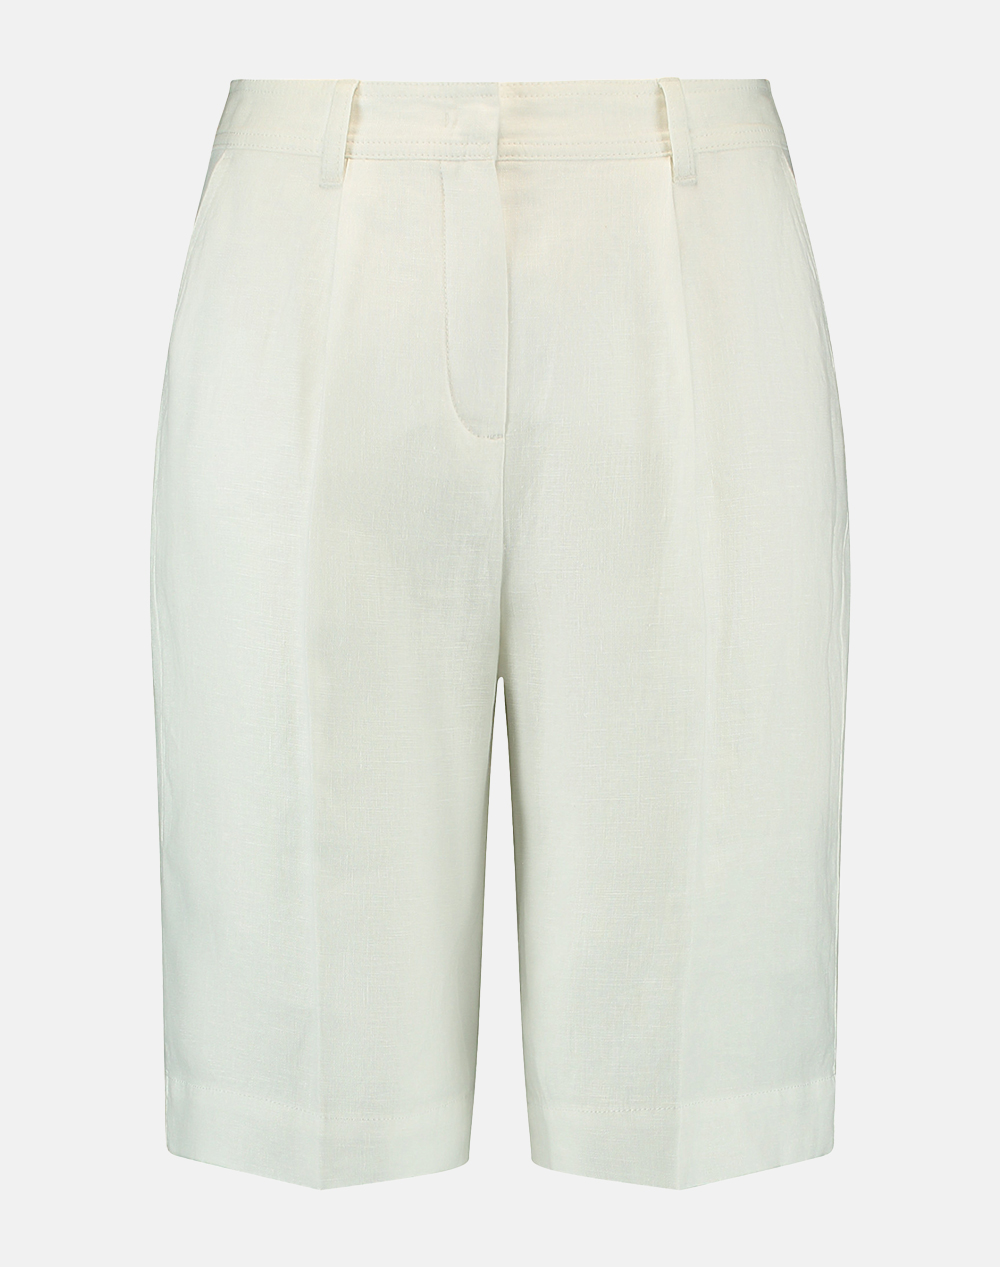 GERRY WEBER PANT LEISURE CROPPED 222134-66225-99600 White 3810AGERR2000153_XR19379